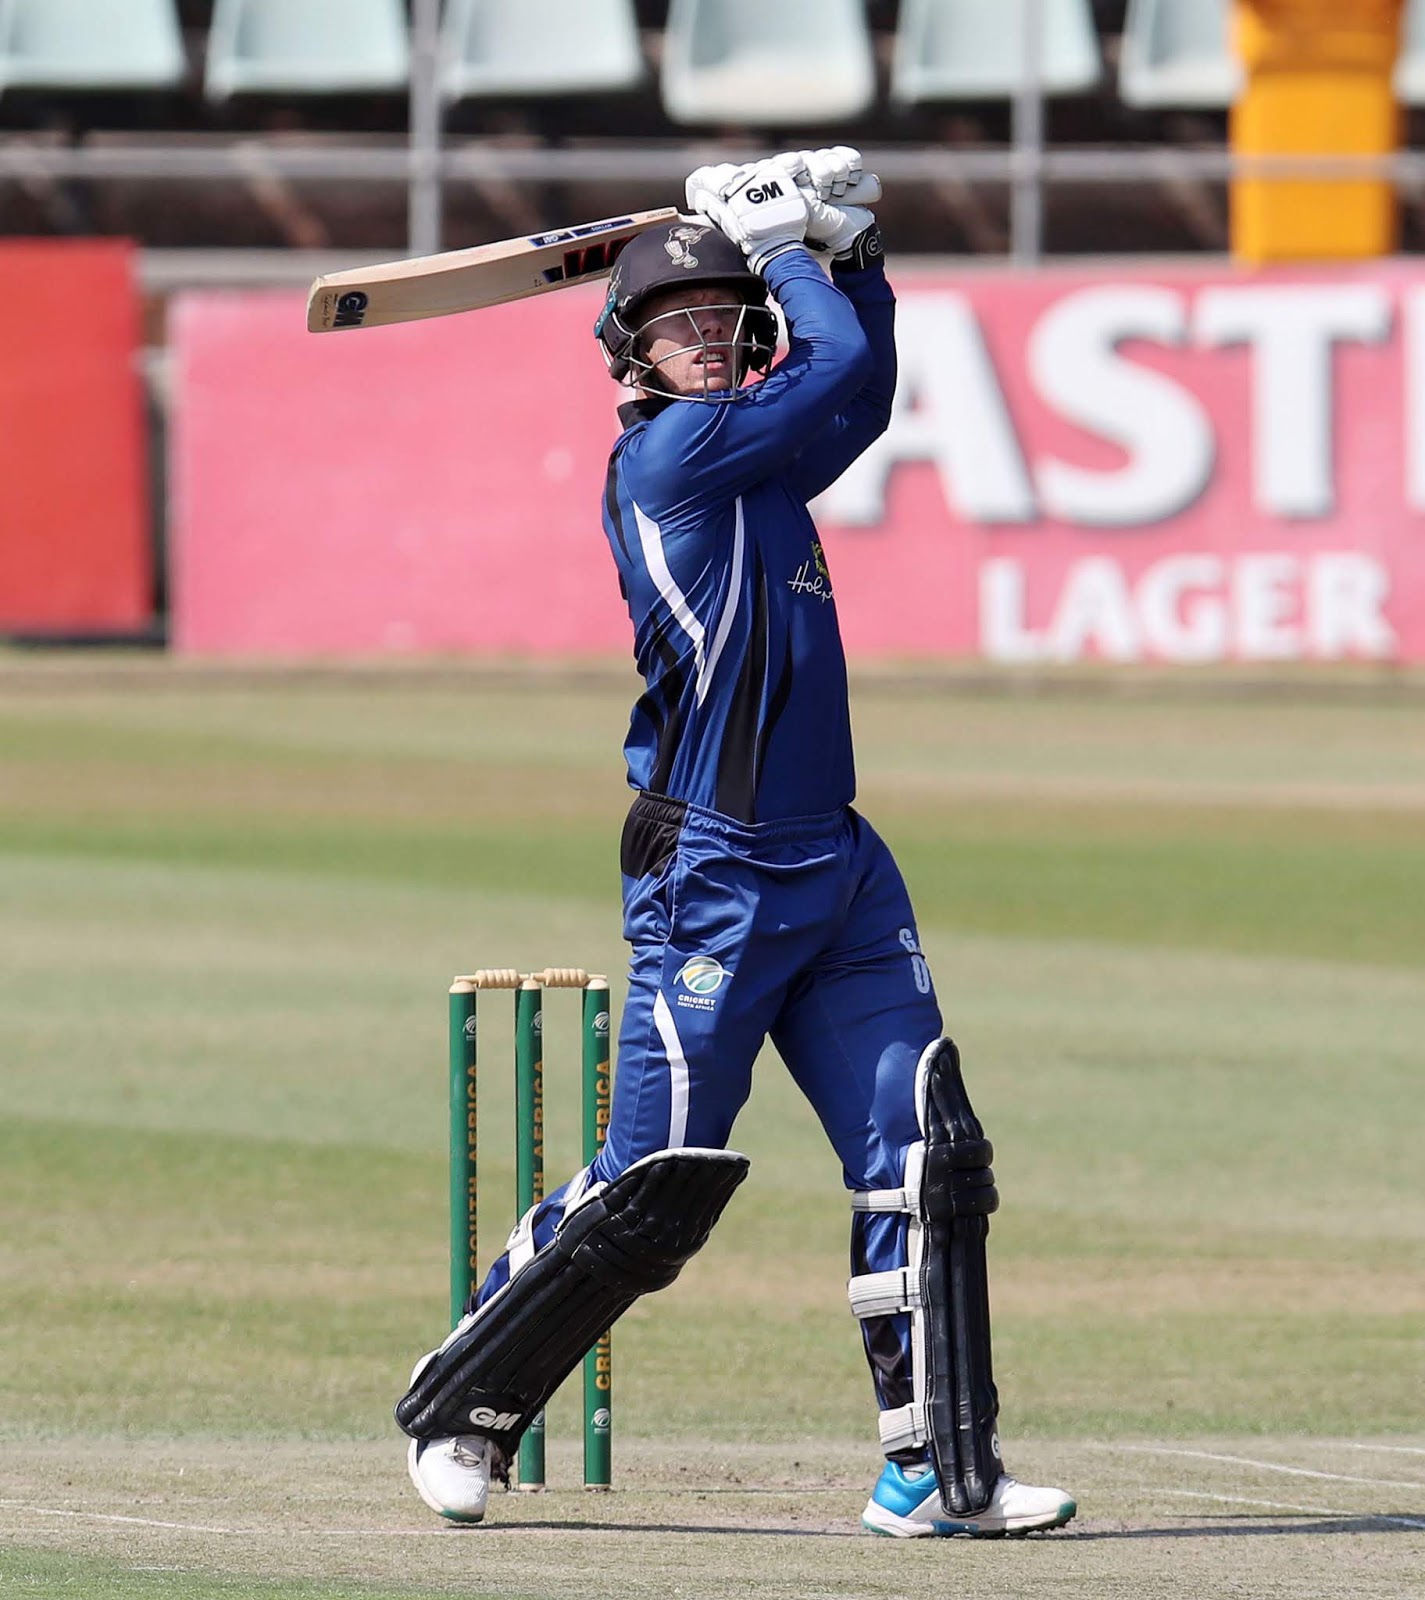 Grant Roelofsen scored a career-best 79 for the Hollywoodbets KZN Inland side in the CSA Provincial T20 Cup final against Easterns in Benoni on Tuesday, in the process becoming the tournament's top ruin-scorer.